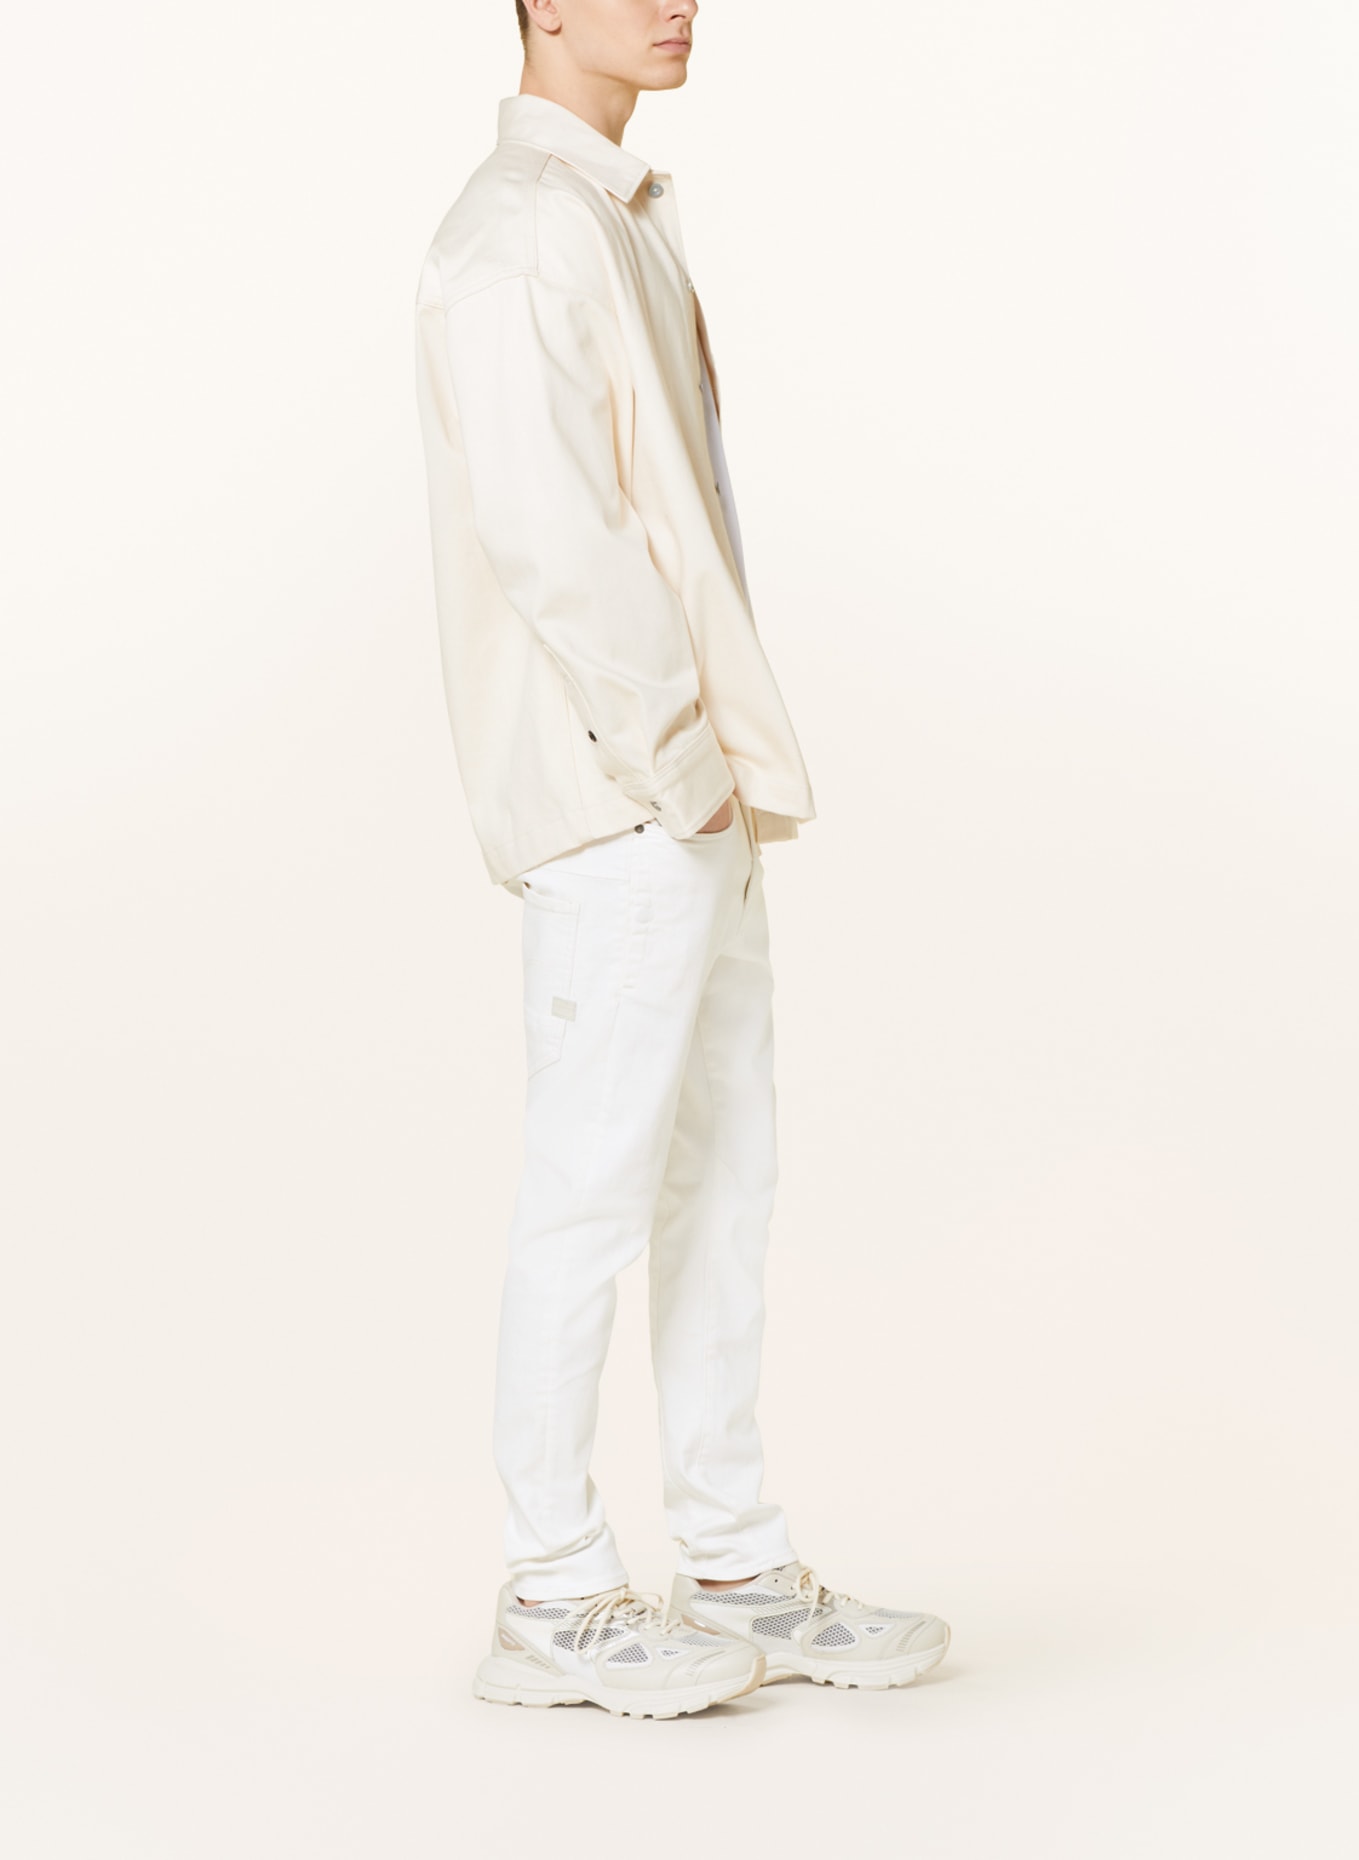 G-Star RAW Jeans D-STAQ 3D slim fit, Color: G006 white gd (Image 4)